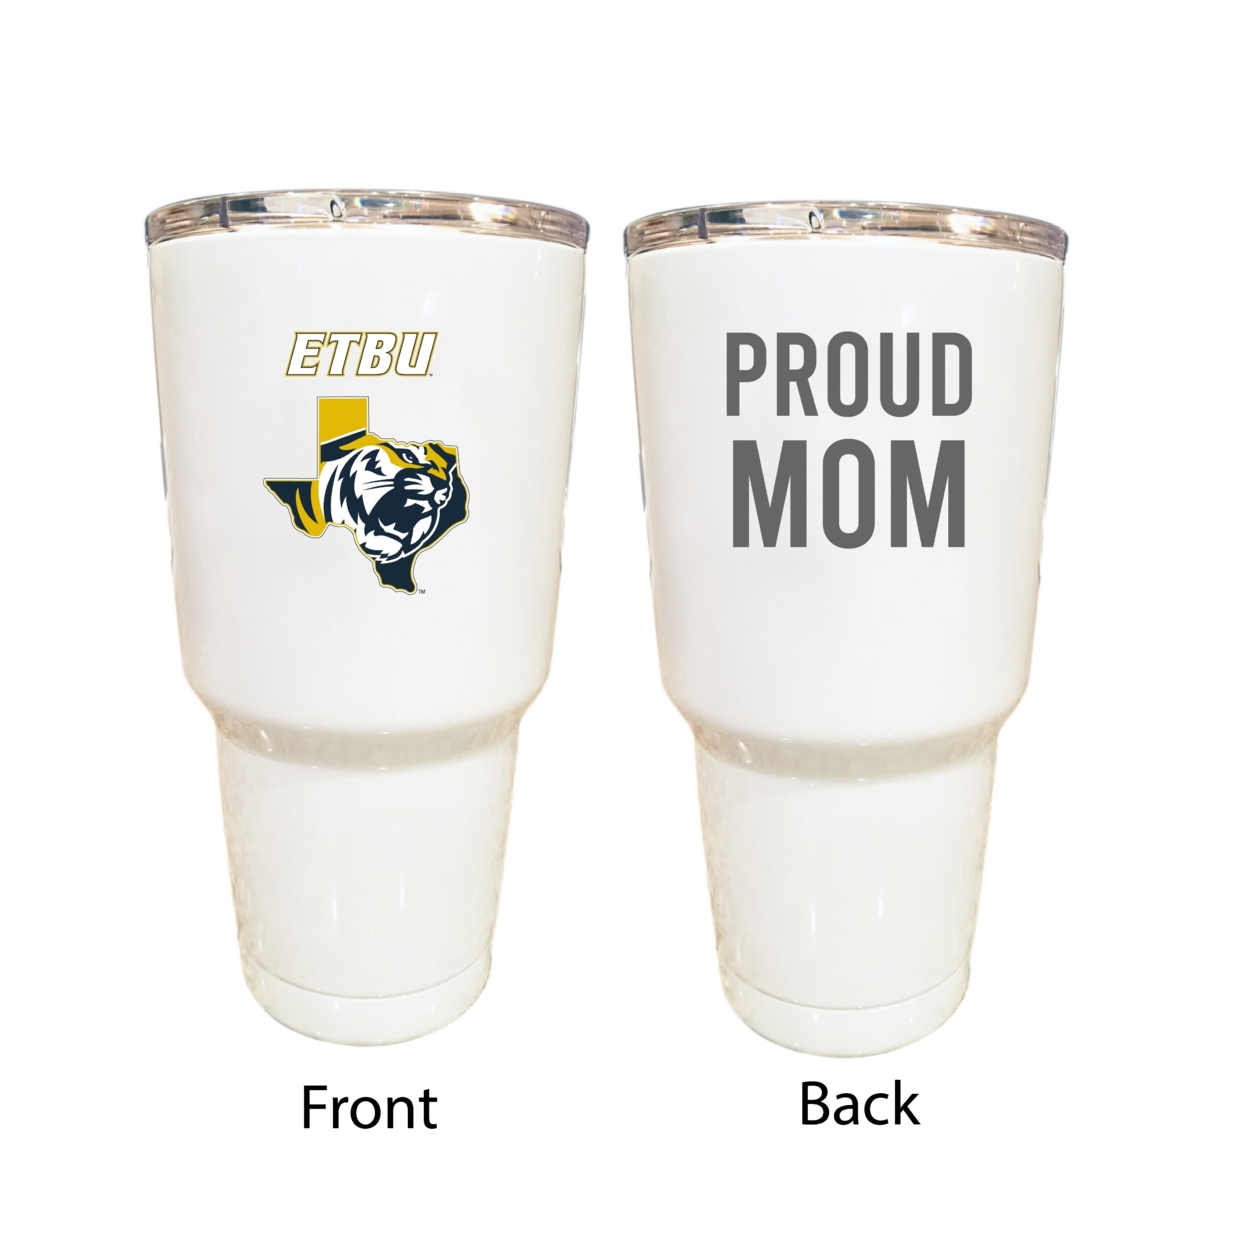 East Texas Baptist University Proud Mom 24 Oz Insulated Stainless Steel Tumblers Choose Your Color.